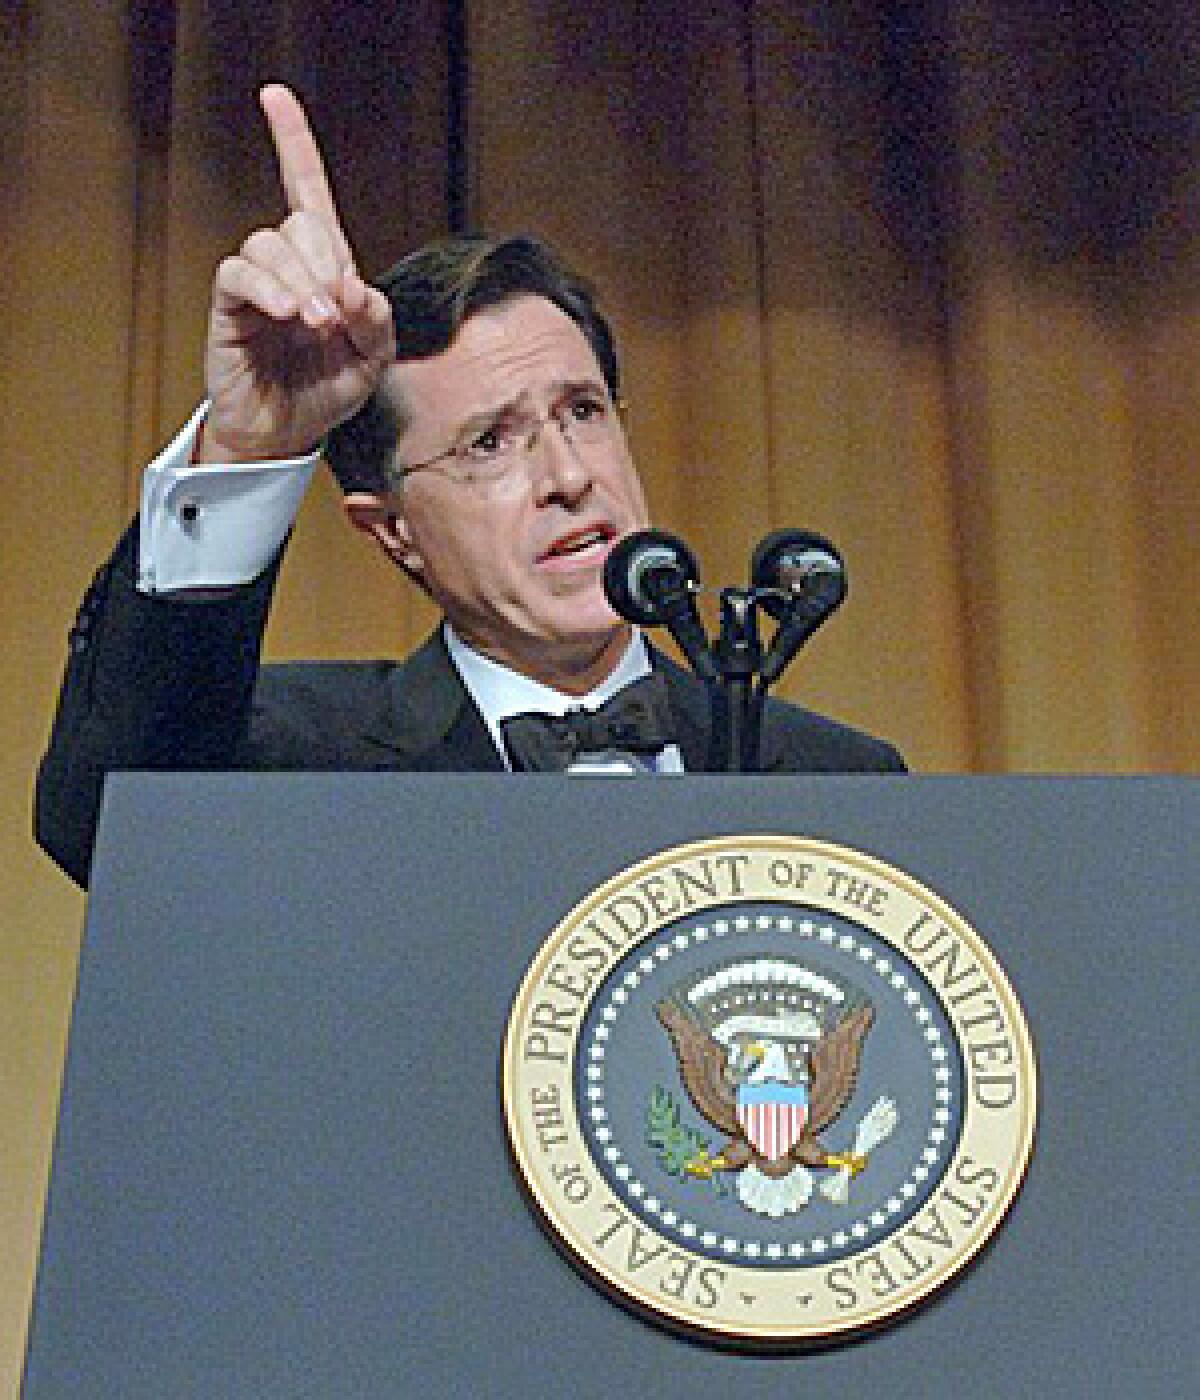 Colbert, seen here at the White House Correspondents' Dinner in 2006, has announced his candidacy for president of the United States.